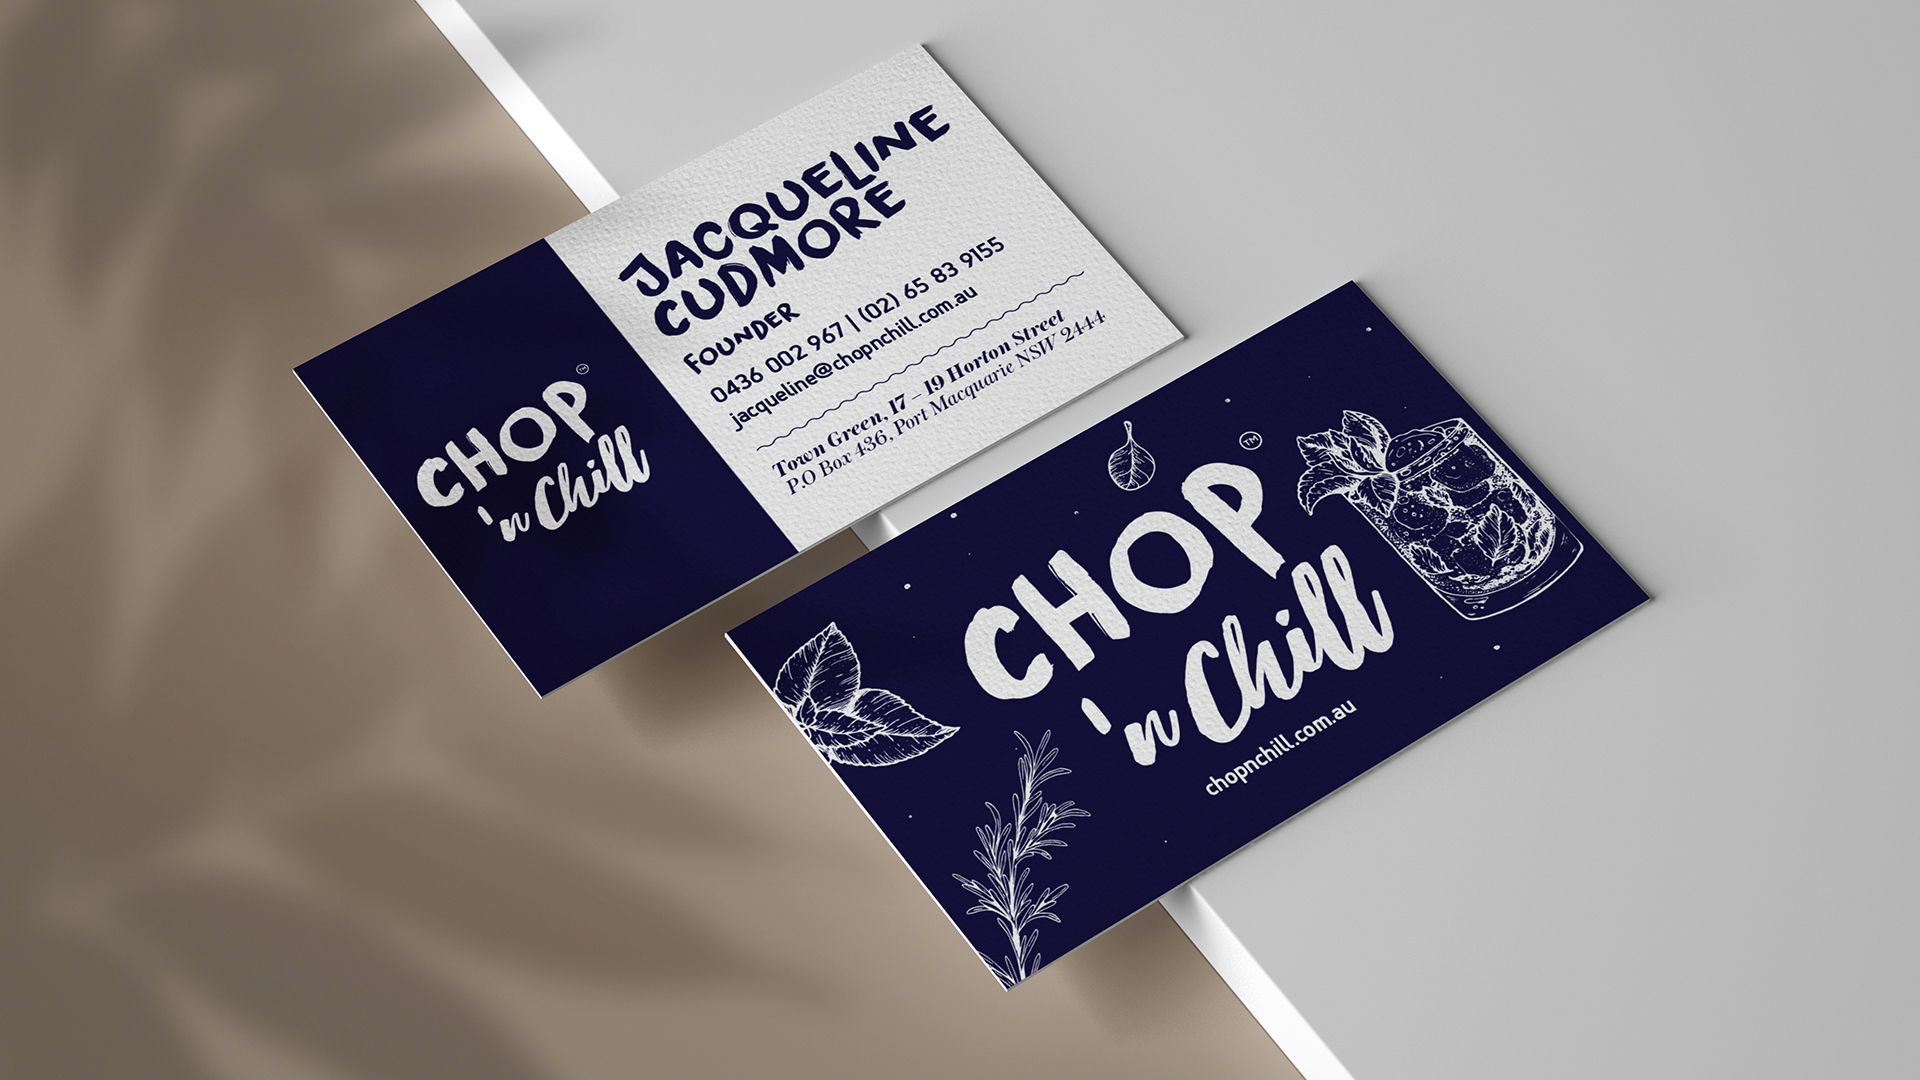 Graphic Design services for  Chop ‘n Chill